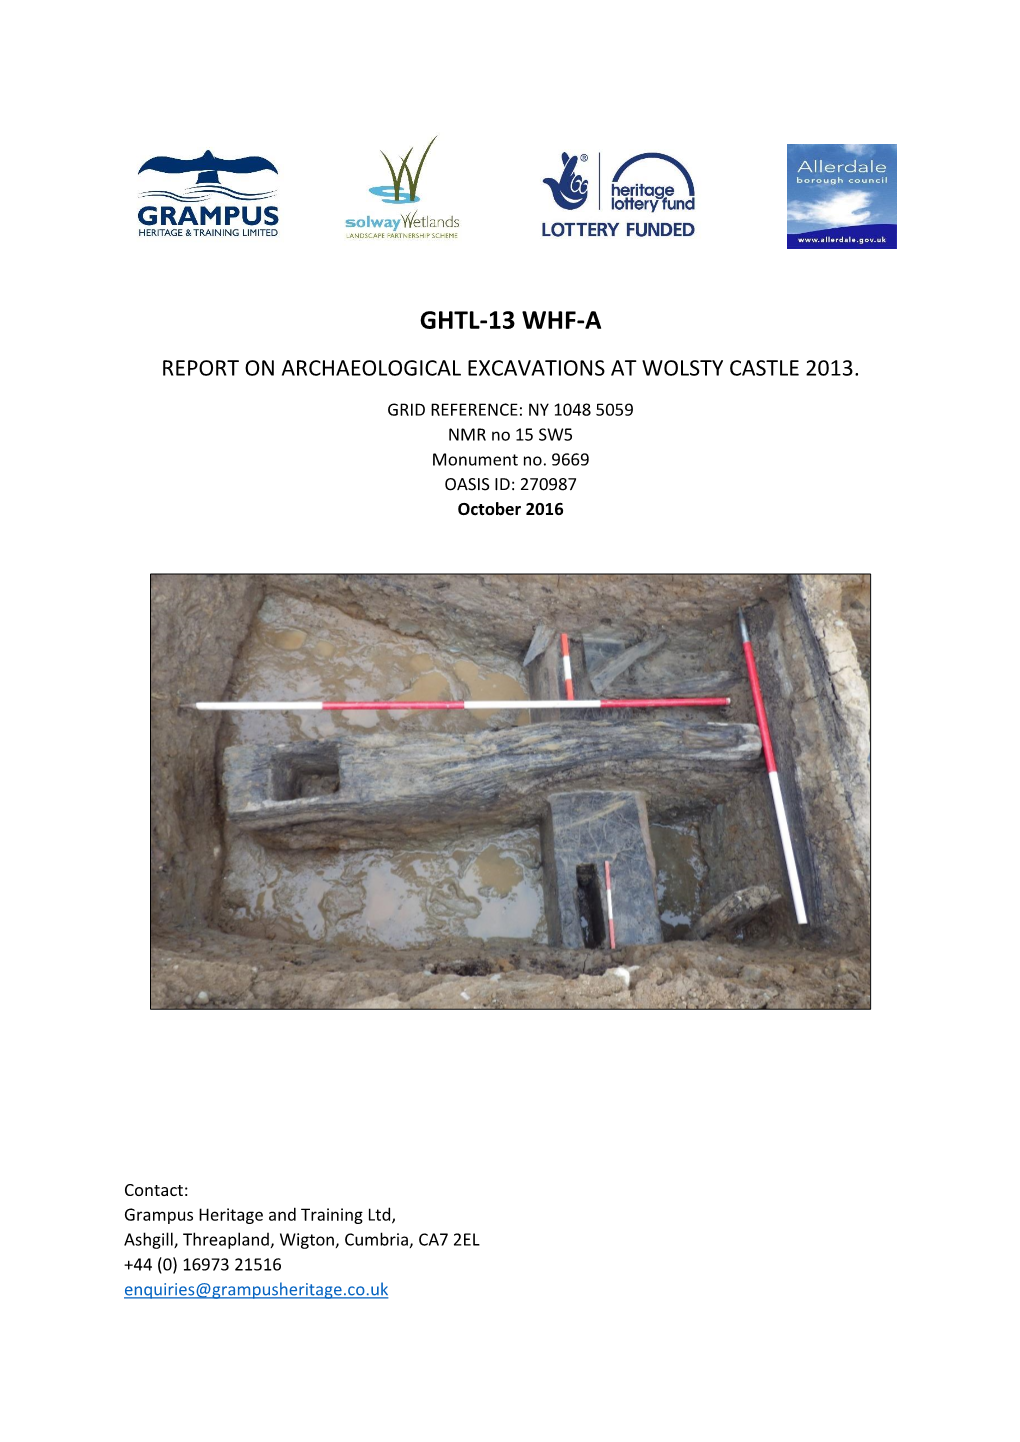 Report on Archaeological Excavations at Wolsty Castle 2013